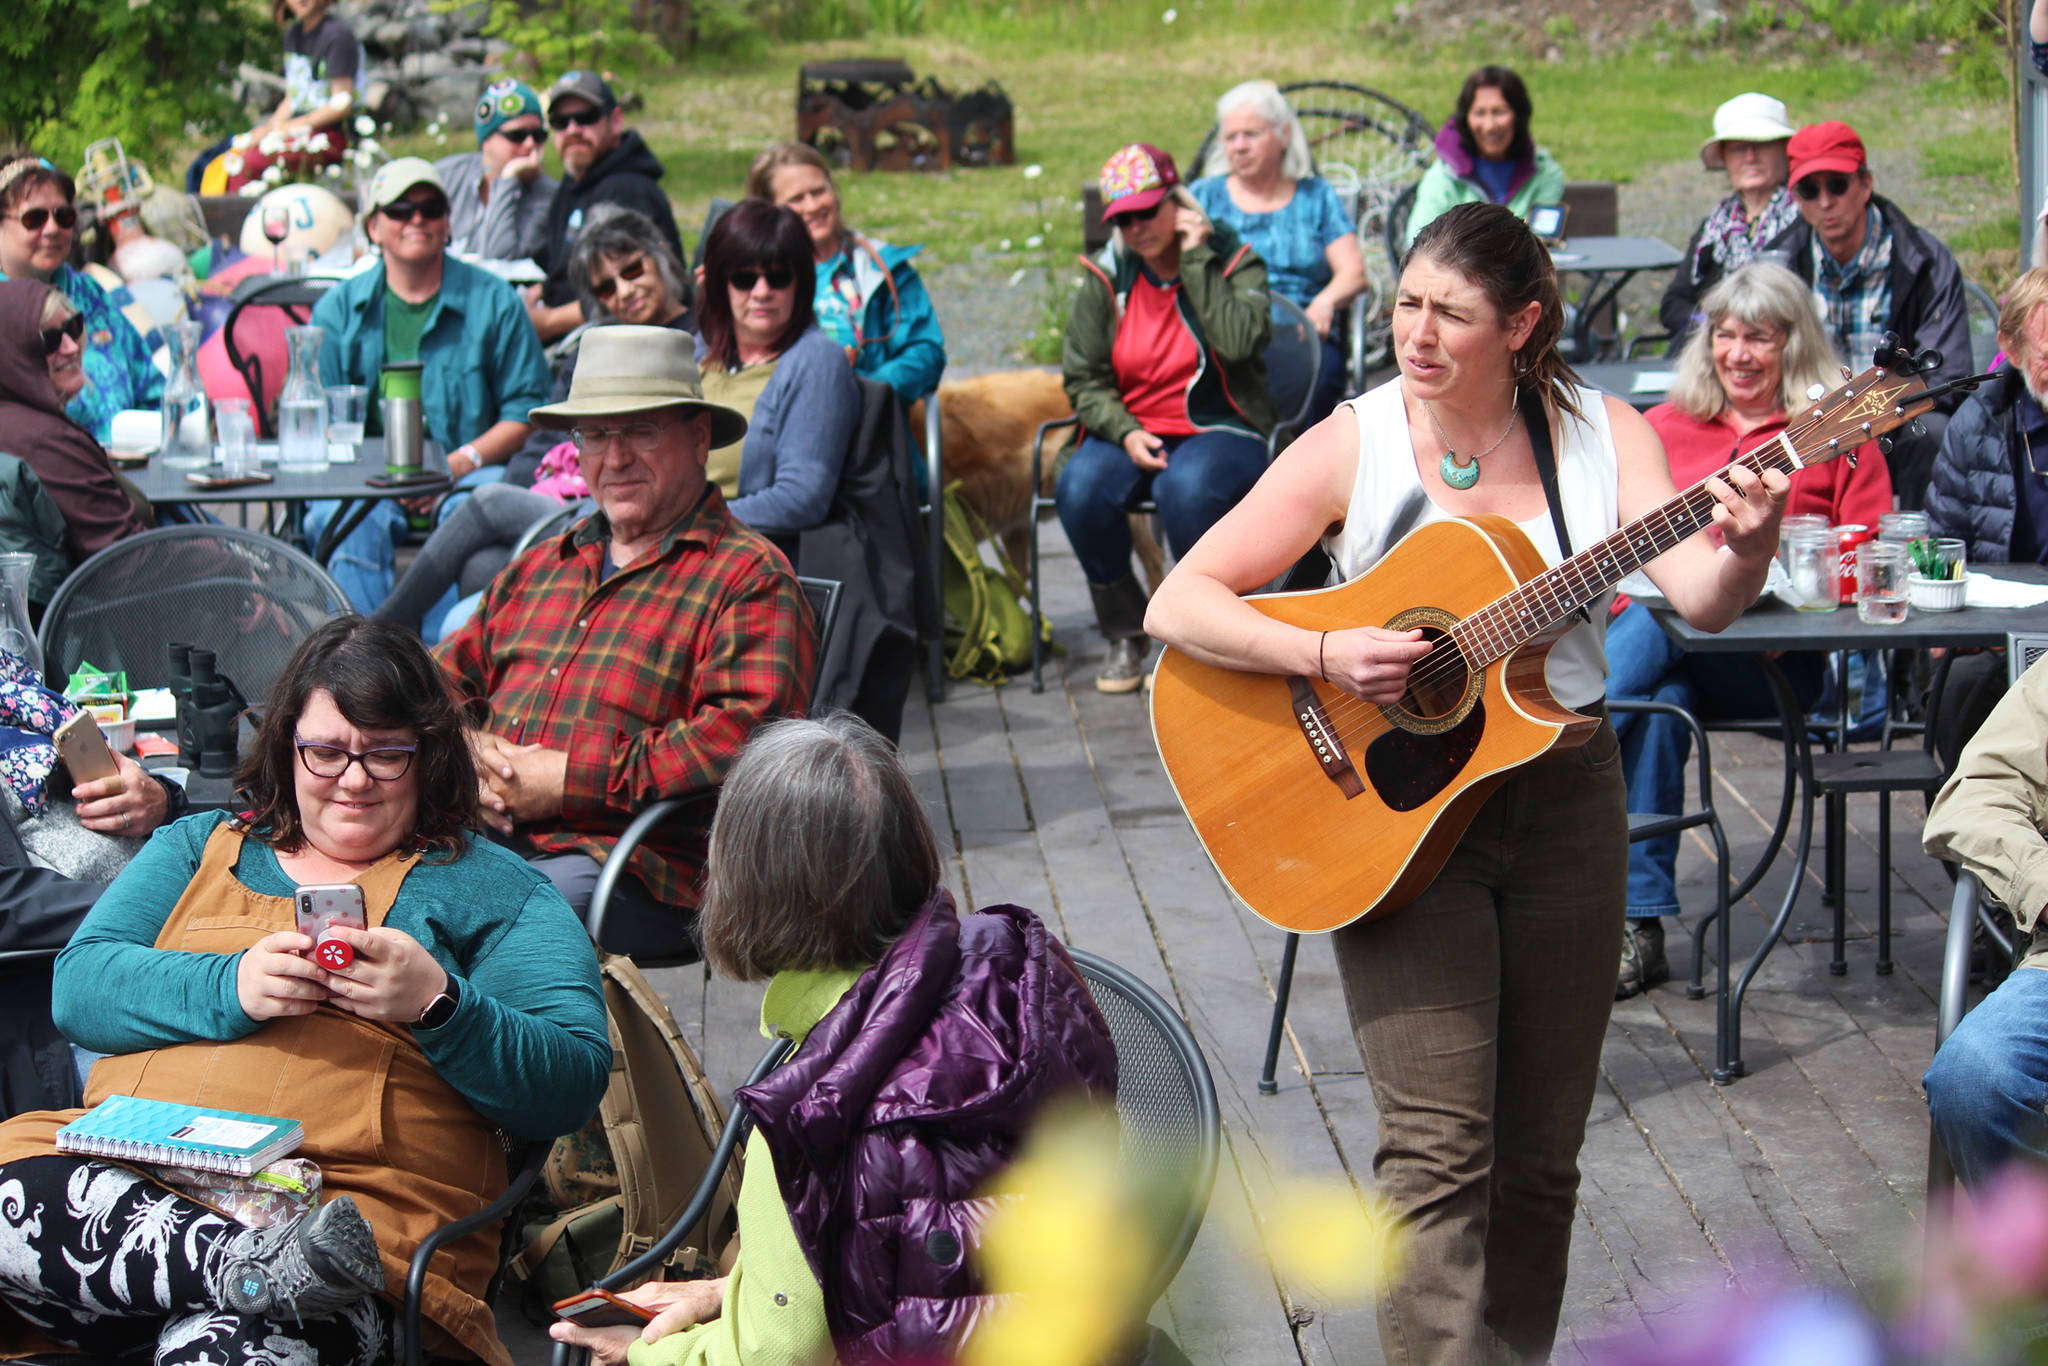 Kat Moore walks through the assembled crowd while she plays her set at the Seldovia Boardwalk Hotel on Friday, June 21, 2019 as part of a round of street performances during the Seldovia Summer Solstice Music Festival in Seldovia, Alaska. (Photo by Megan Pacer/Homer News)